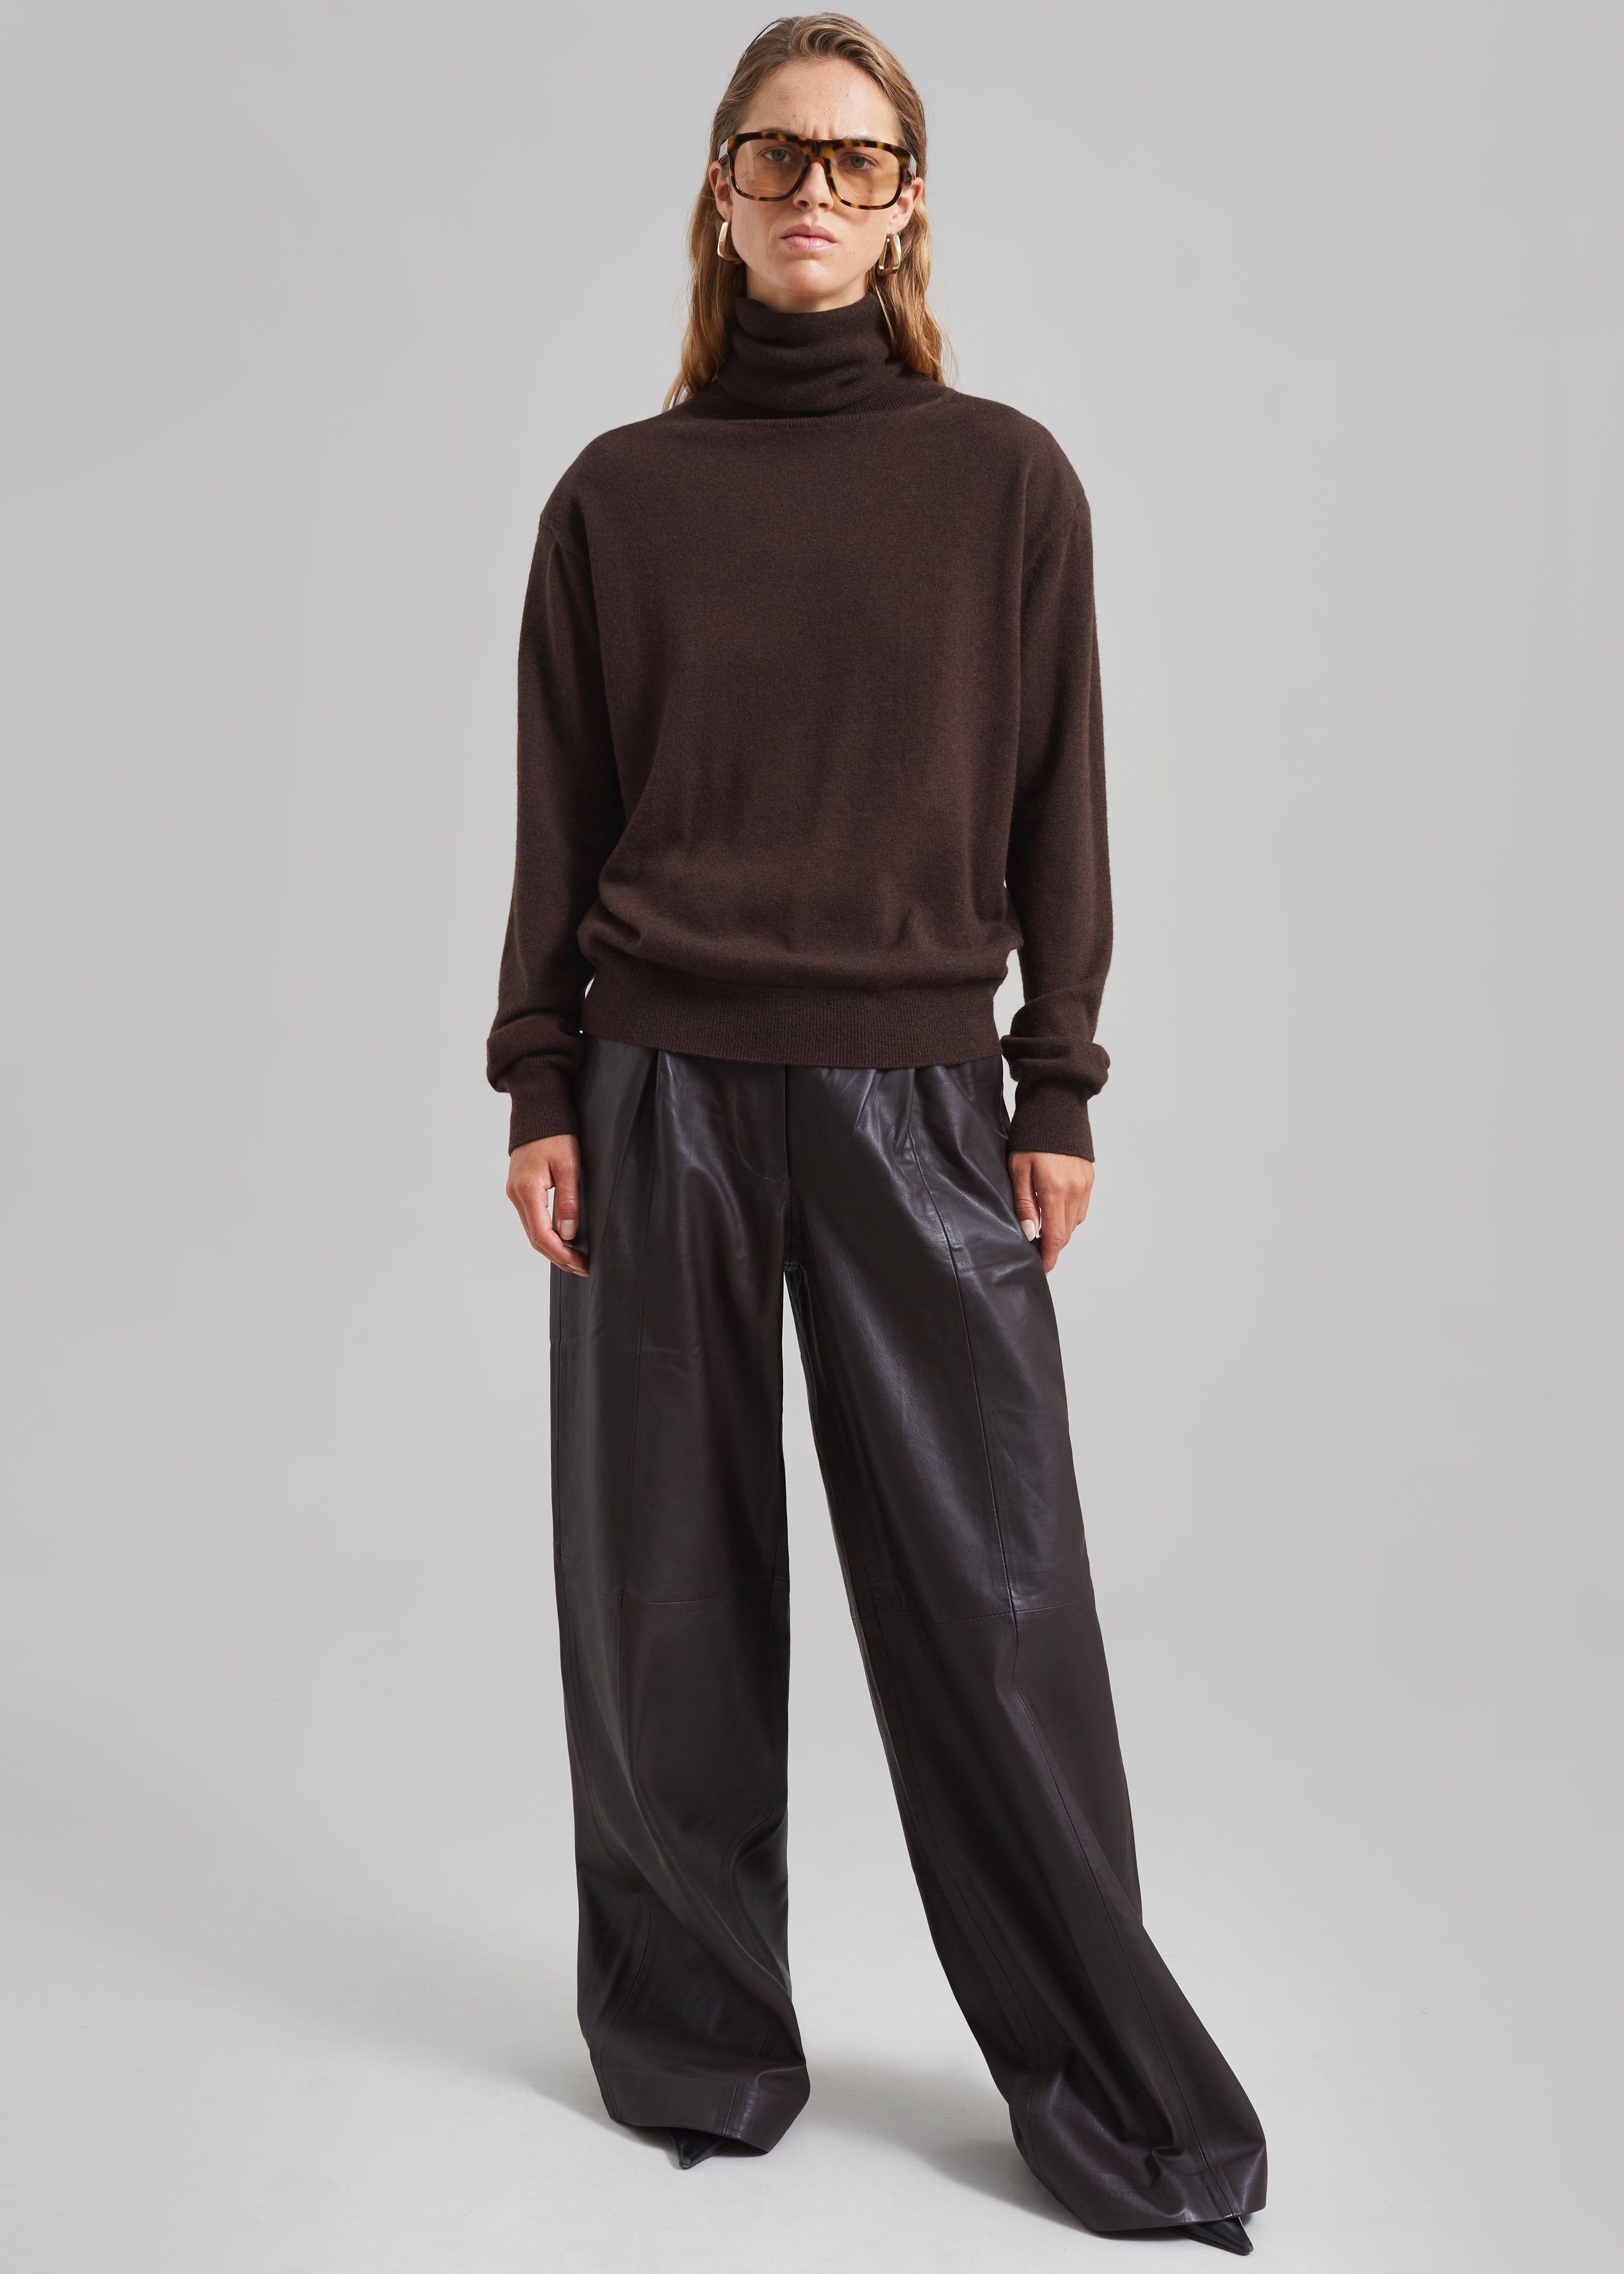 Ines Thin Padded Turtleneck - Brown - 7